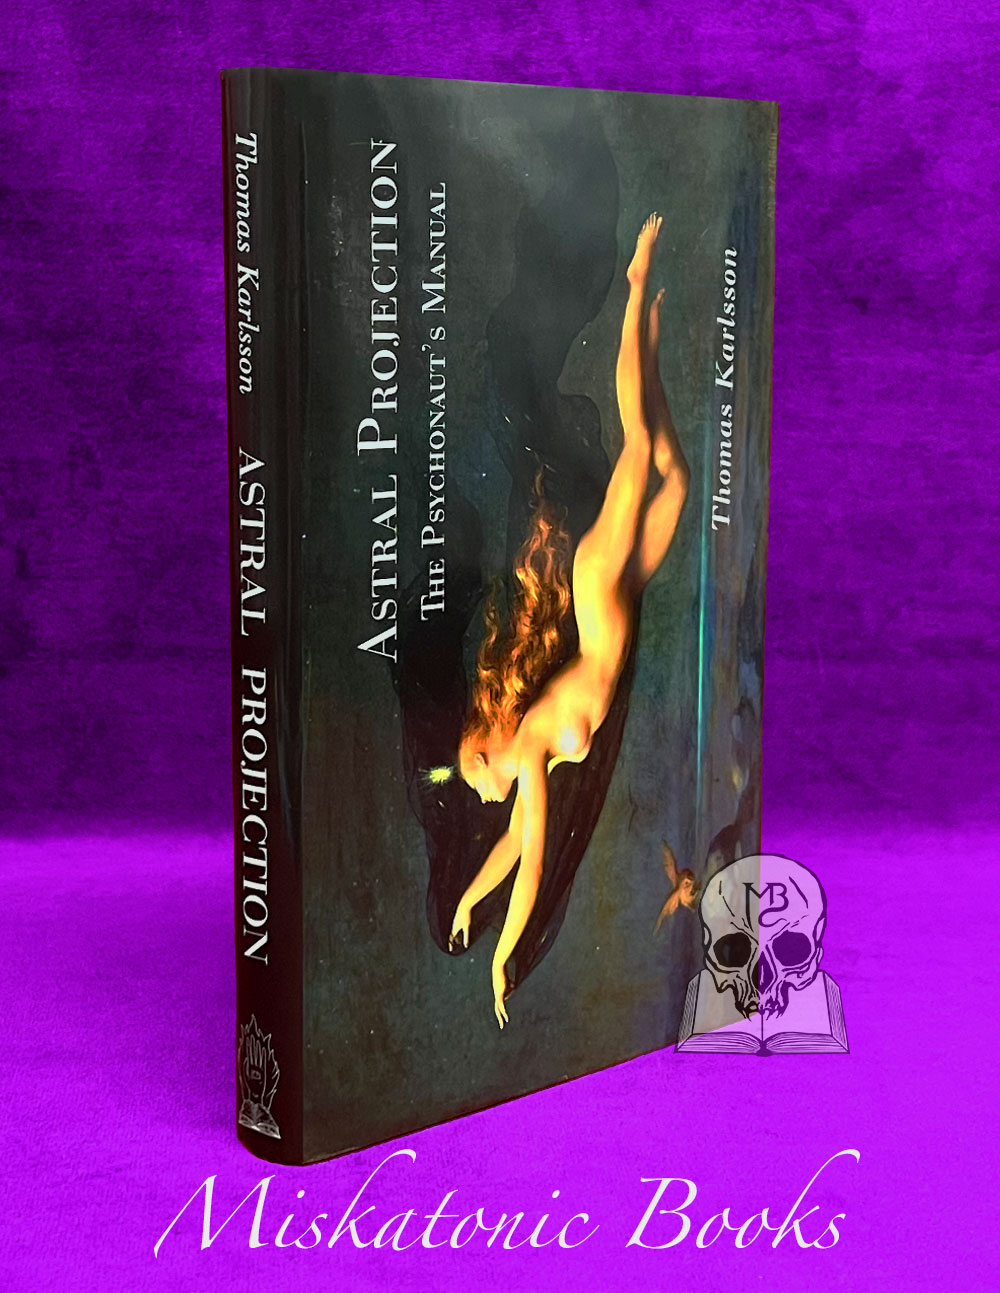 ASTRAL PROJECTION: The Psychonaut's Manual by Thomas karlsson - Limited Edition Hardcover